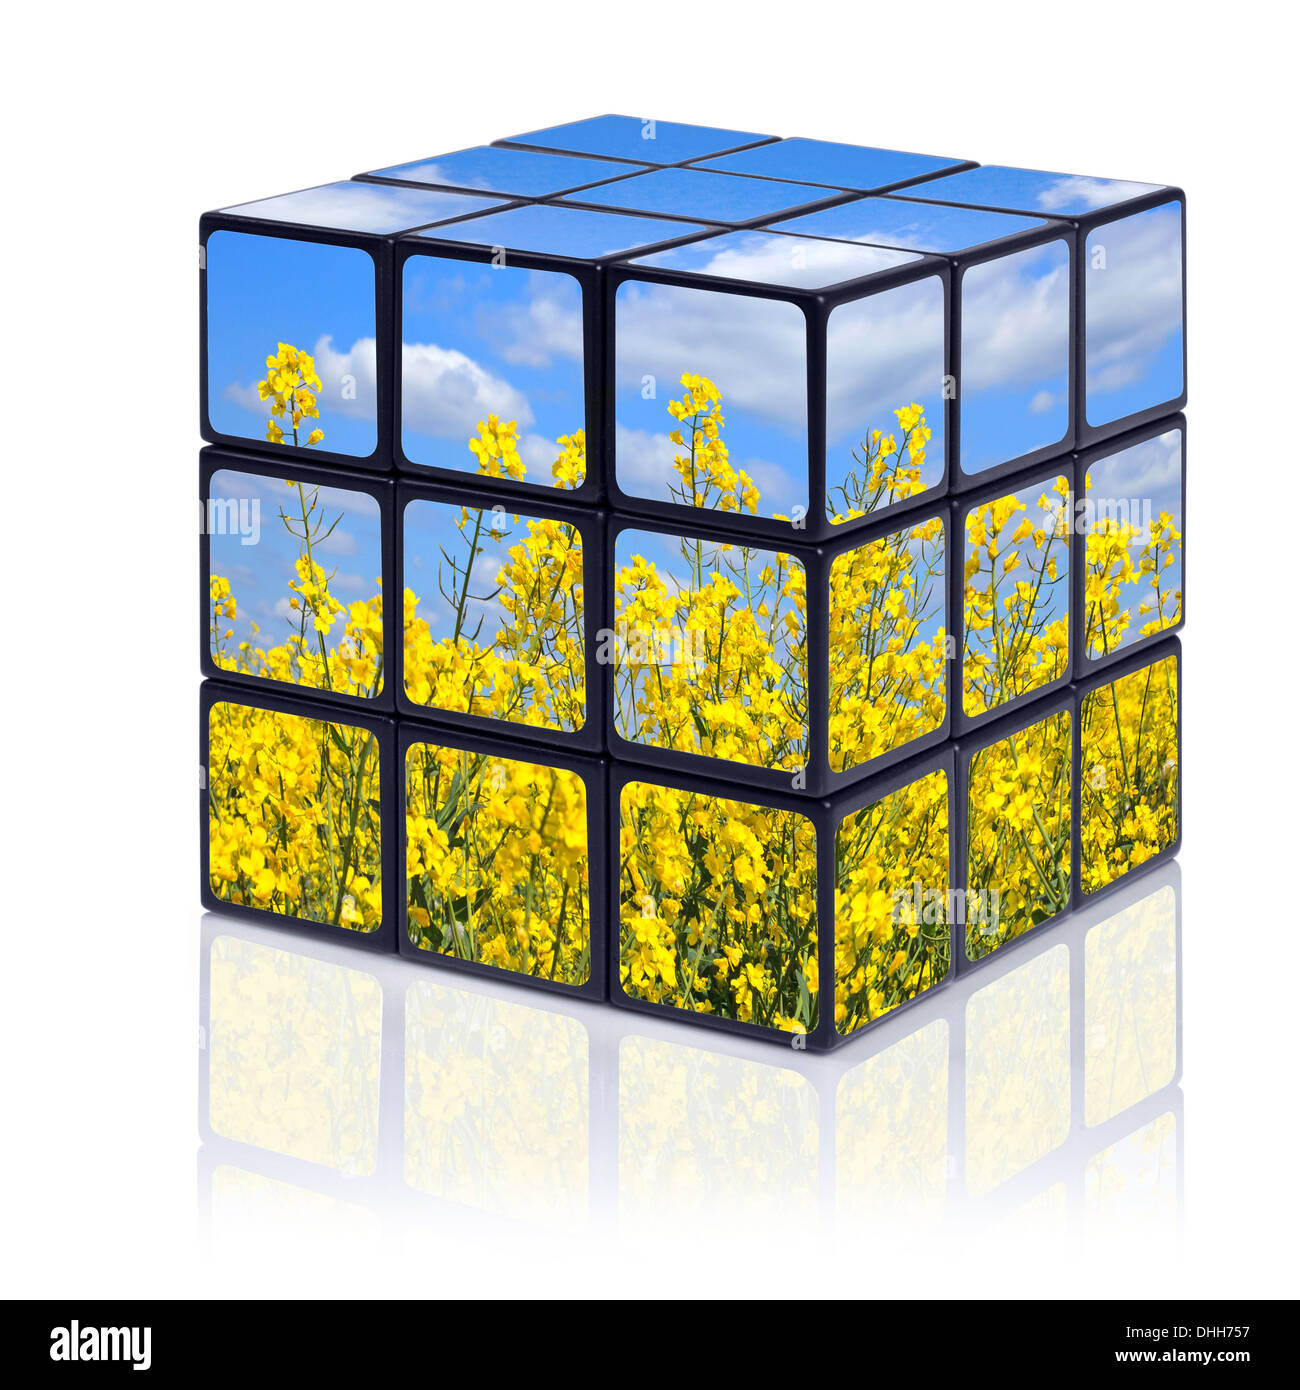 A puzzle cube with a summer scene on all sides, isolated on a white background with reflection. Stock Photo